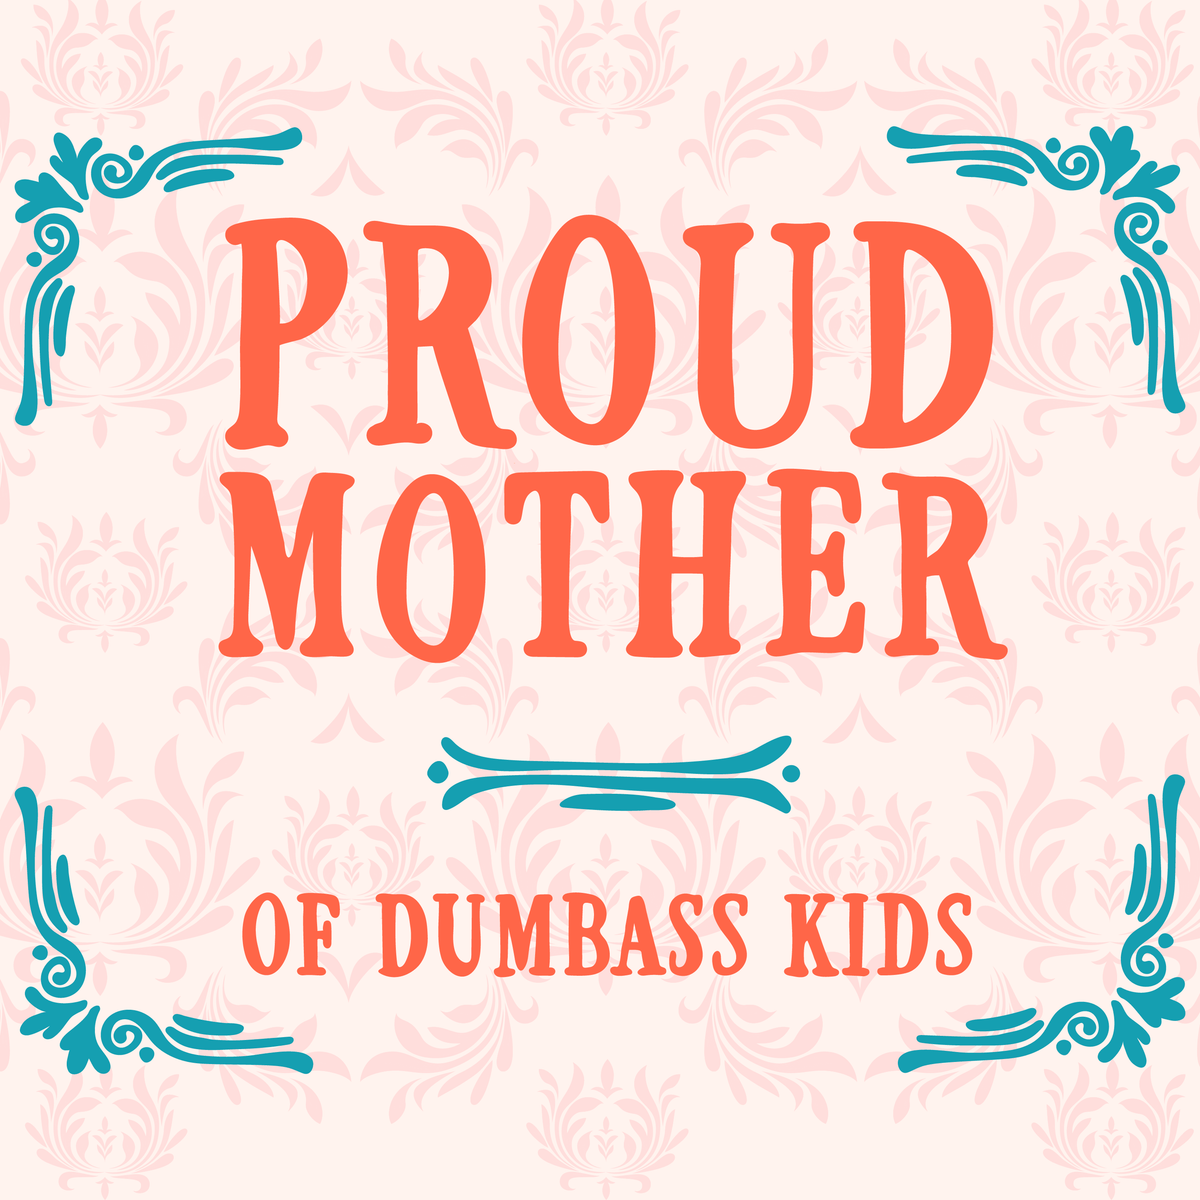 Proud Mother 🥴💩 - Mouse Pad